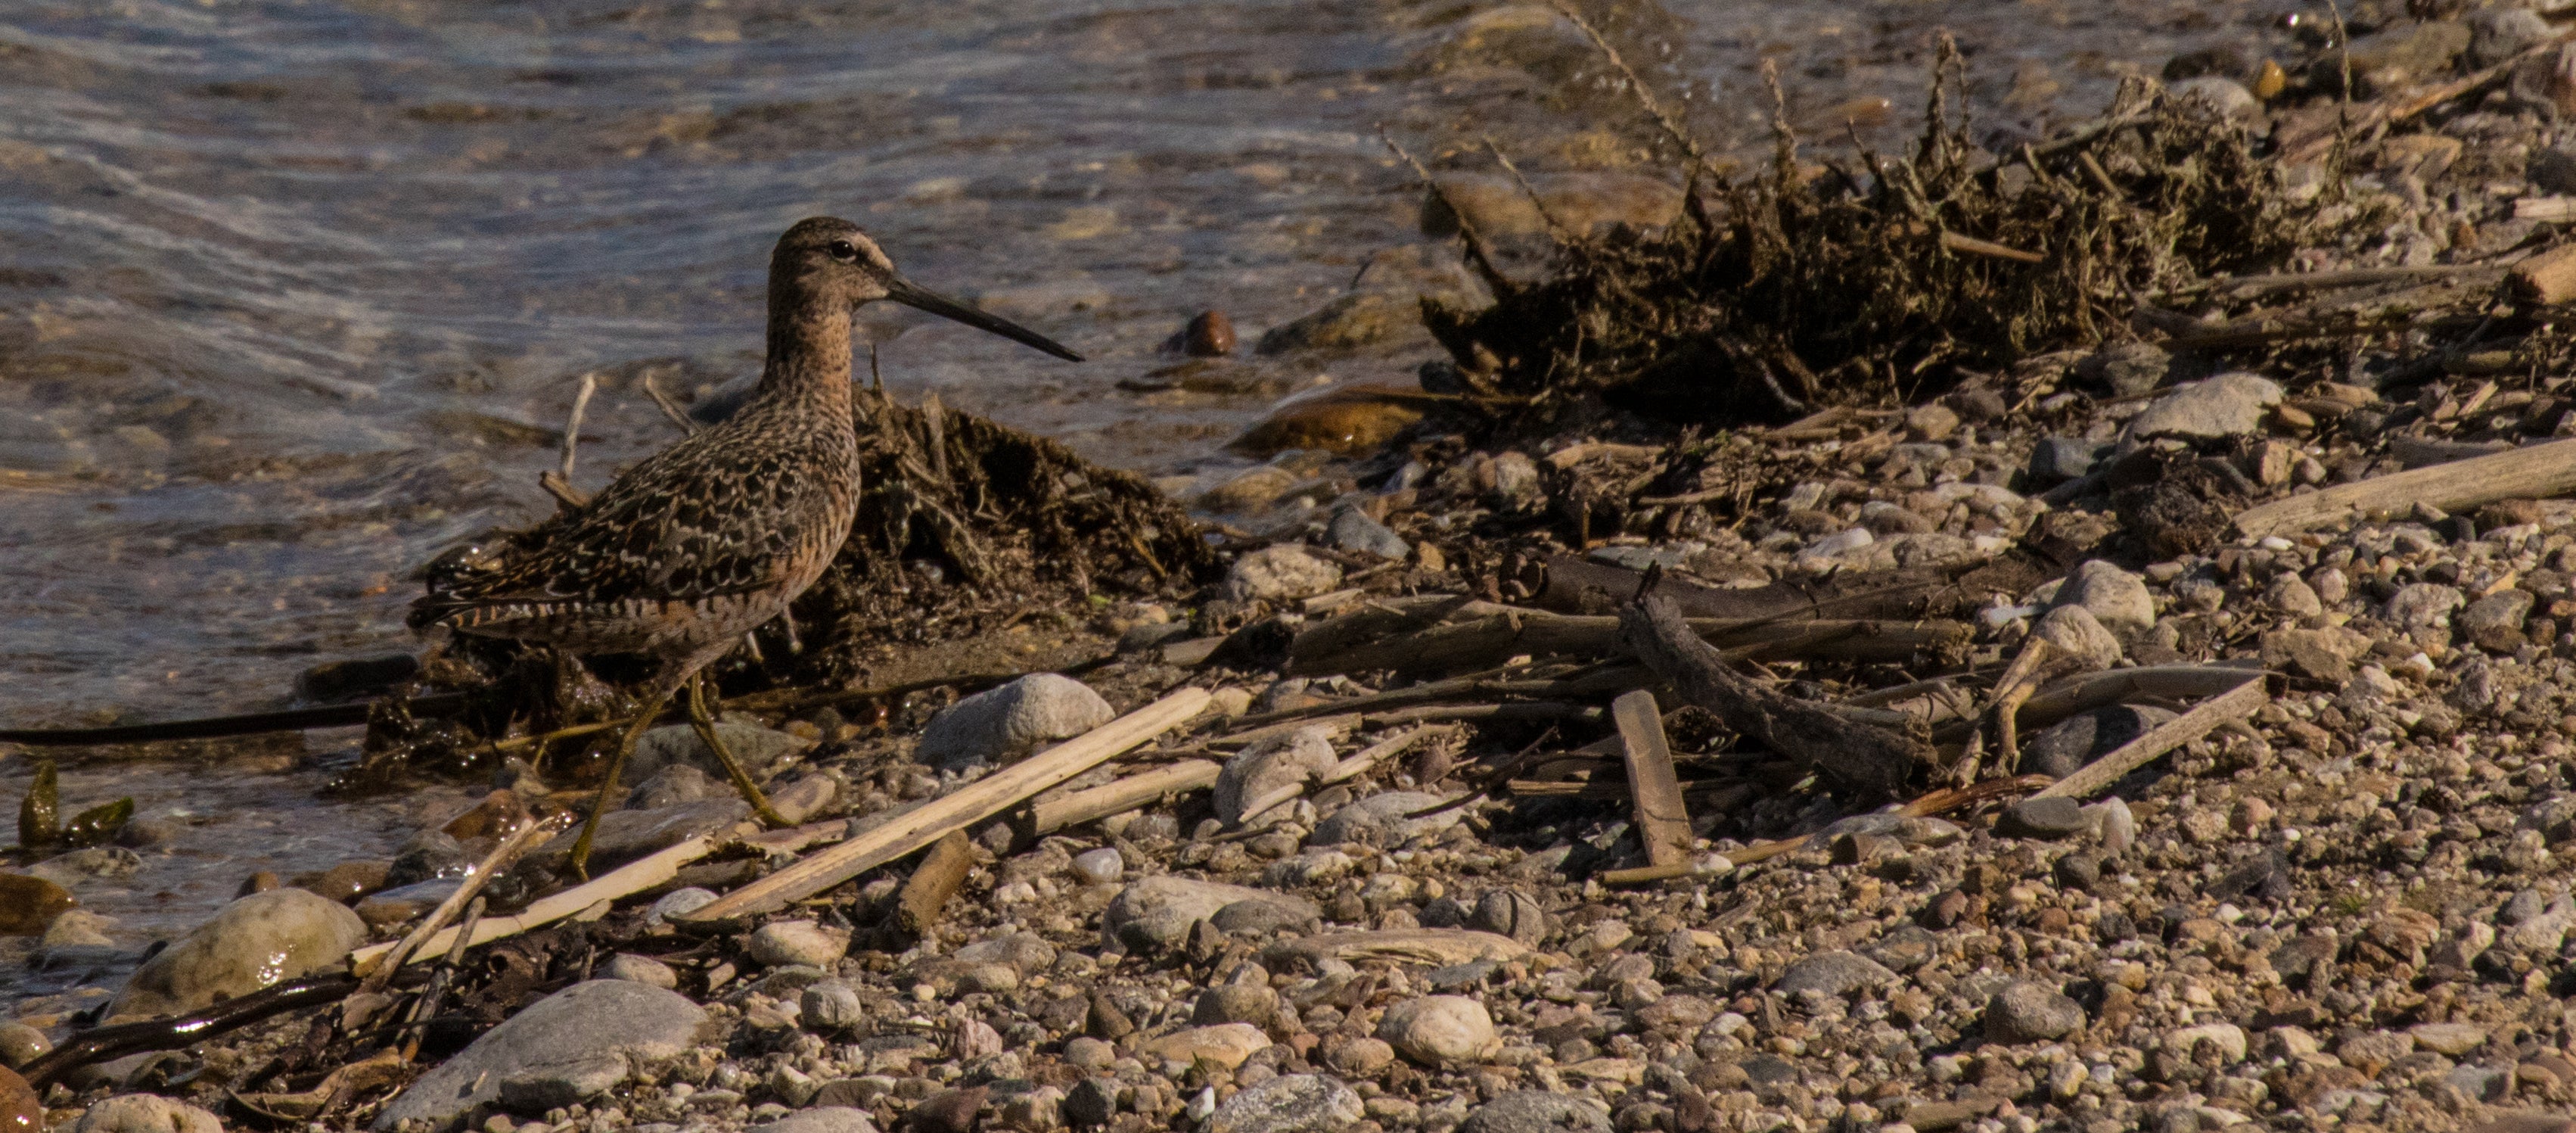 Had never seen a Dowitcher...cool bird sighting.